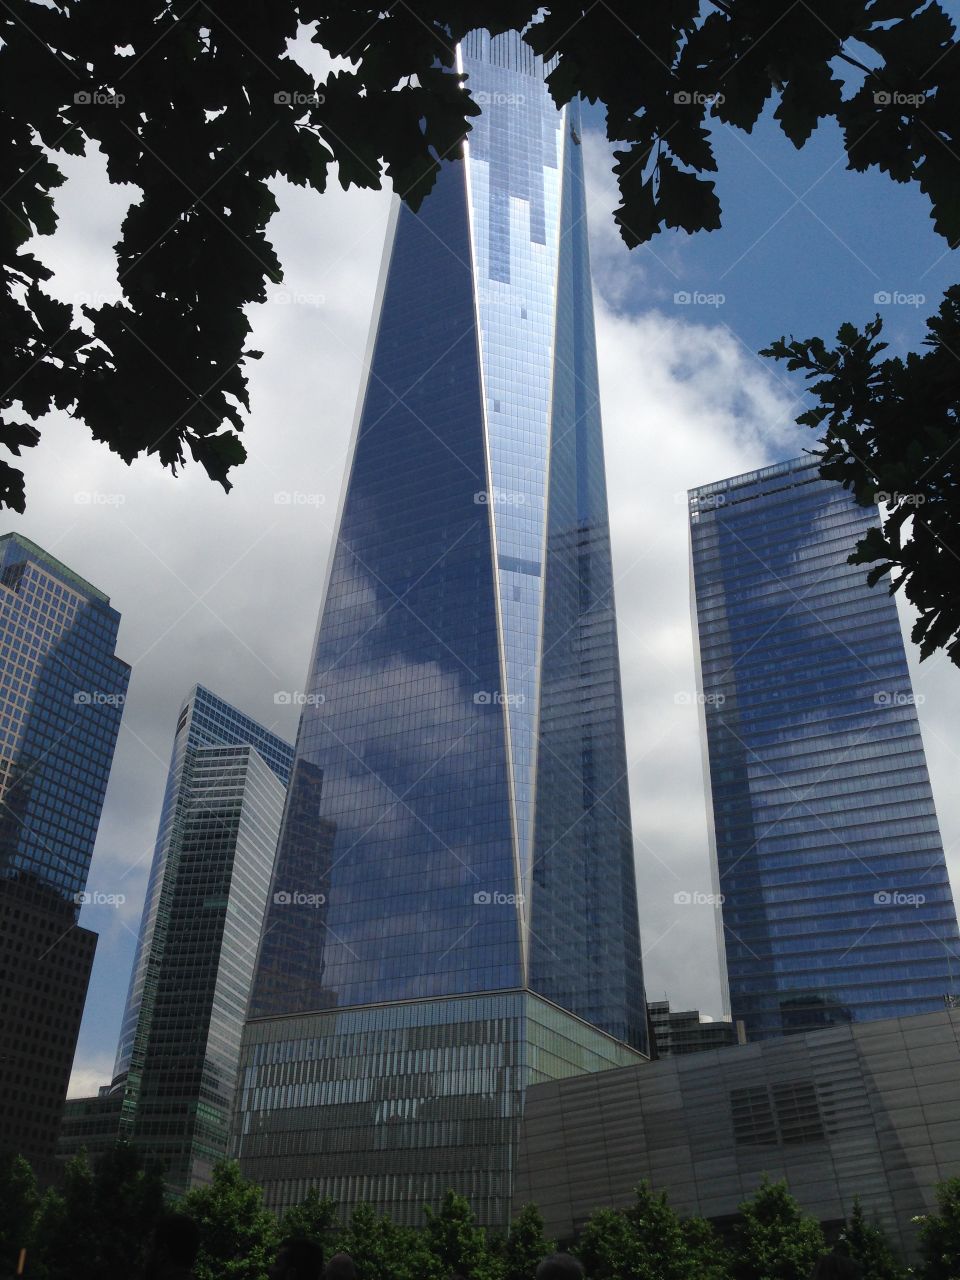 Freedom Tower Shooting Up. The World Trade Center taken from the site of the former twin towers. A powerful image of American strength.